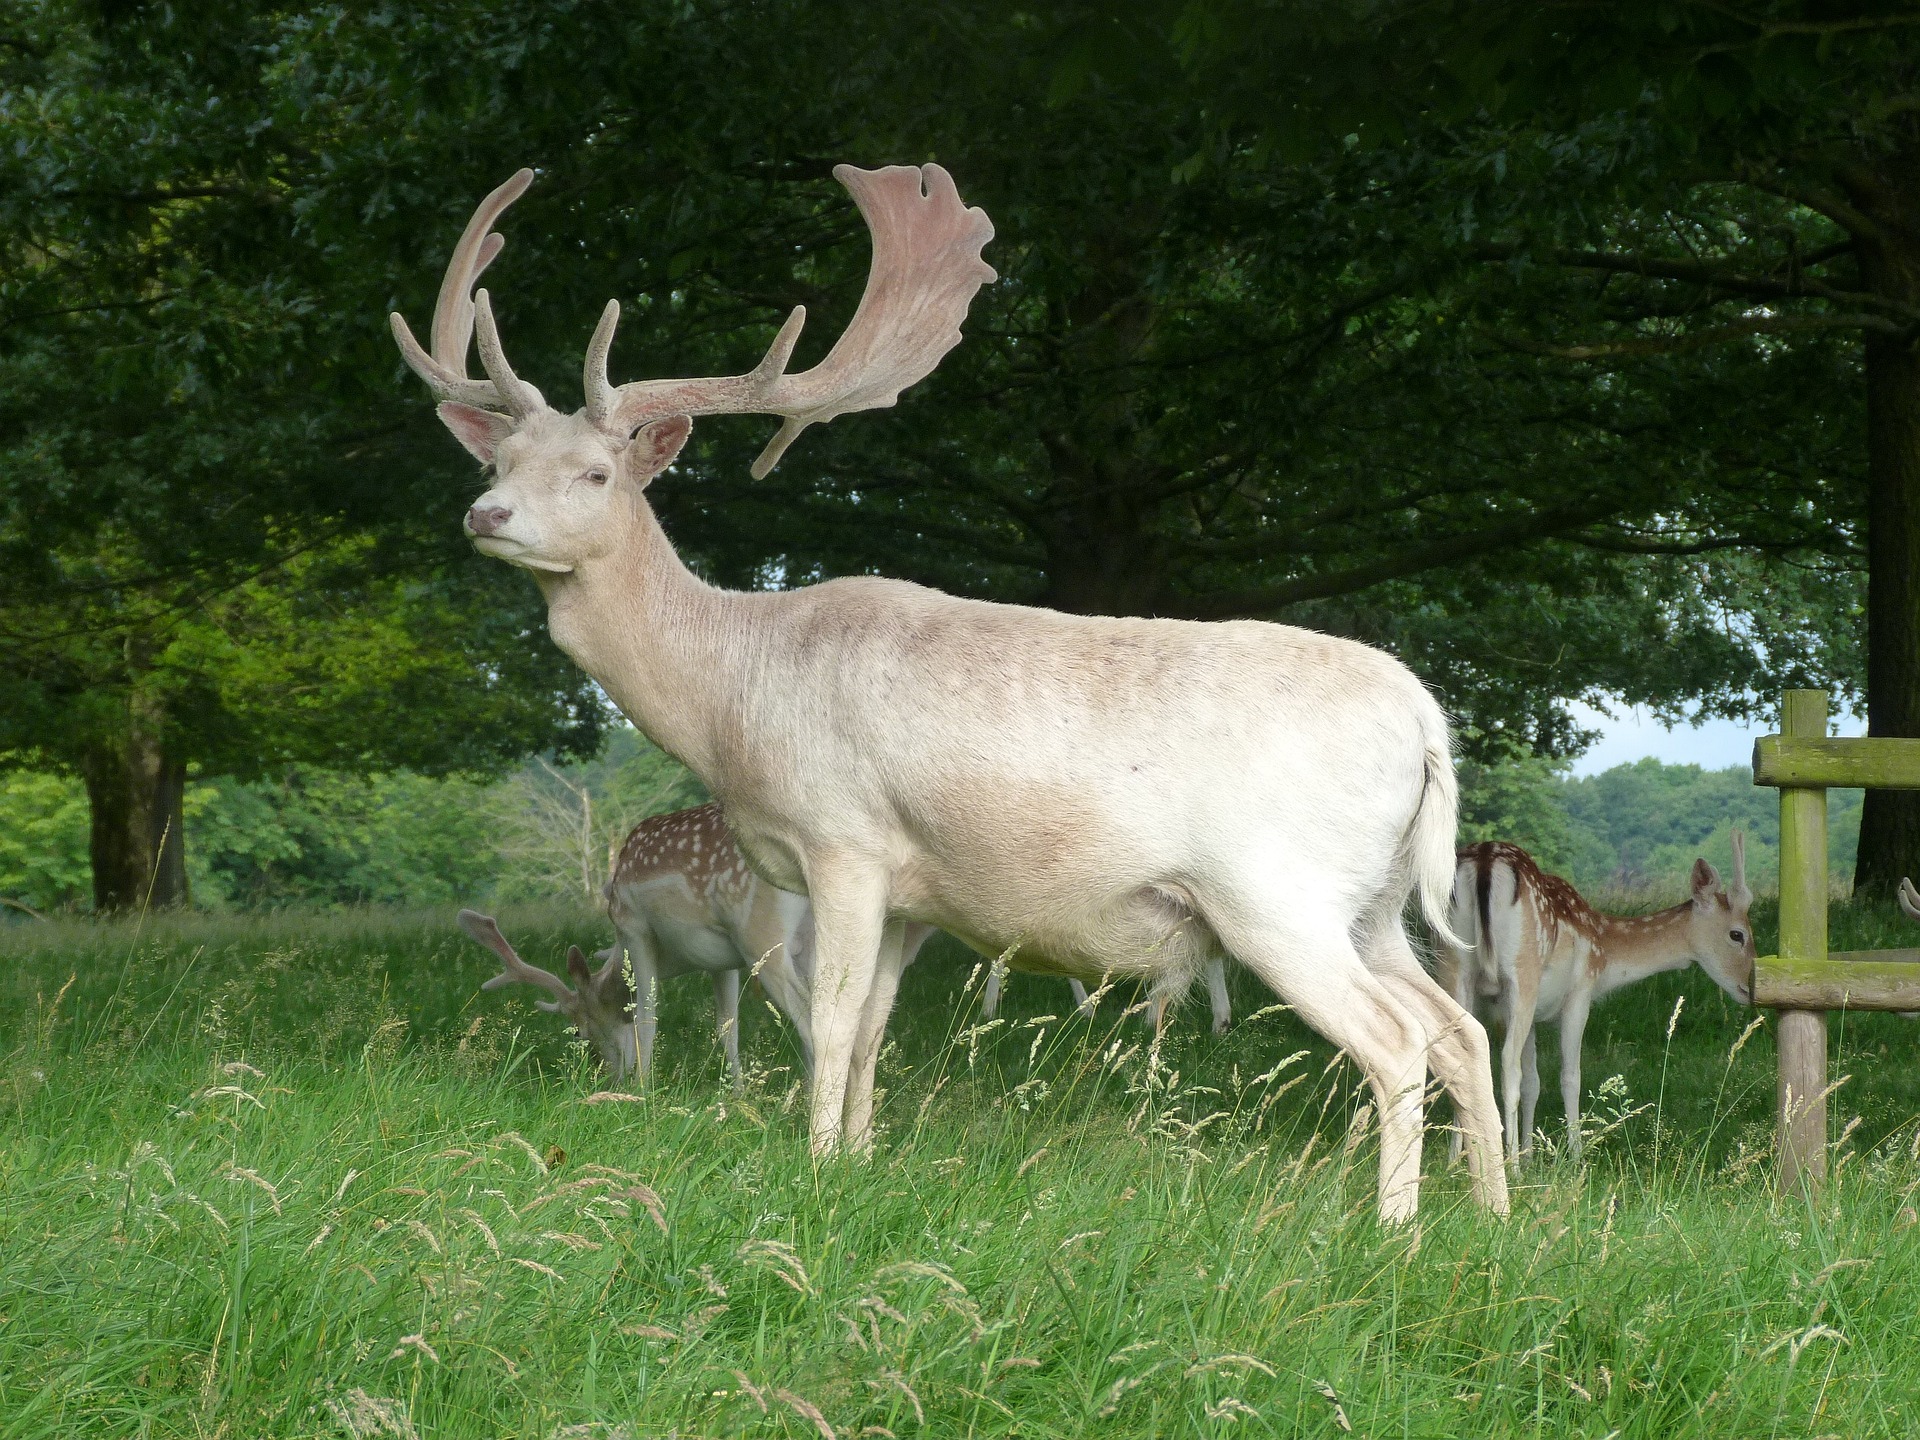 a white stag - regarded as a sacred animal by many